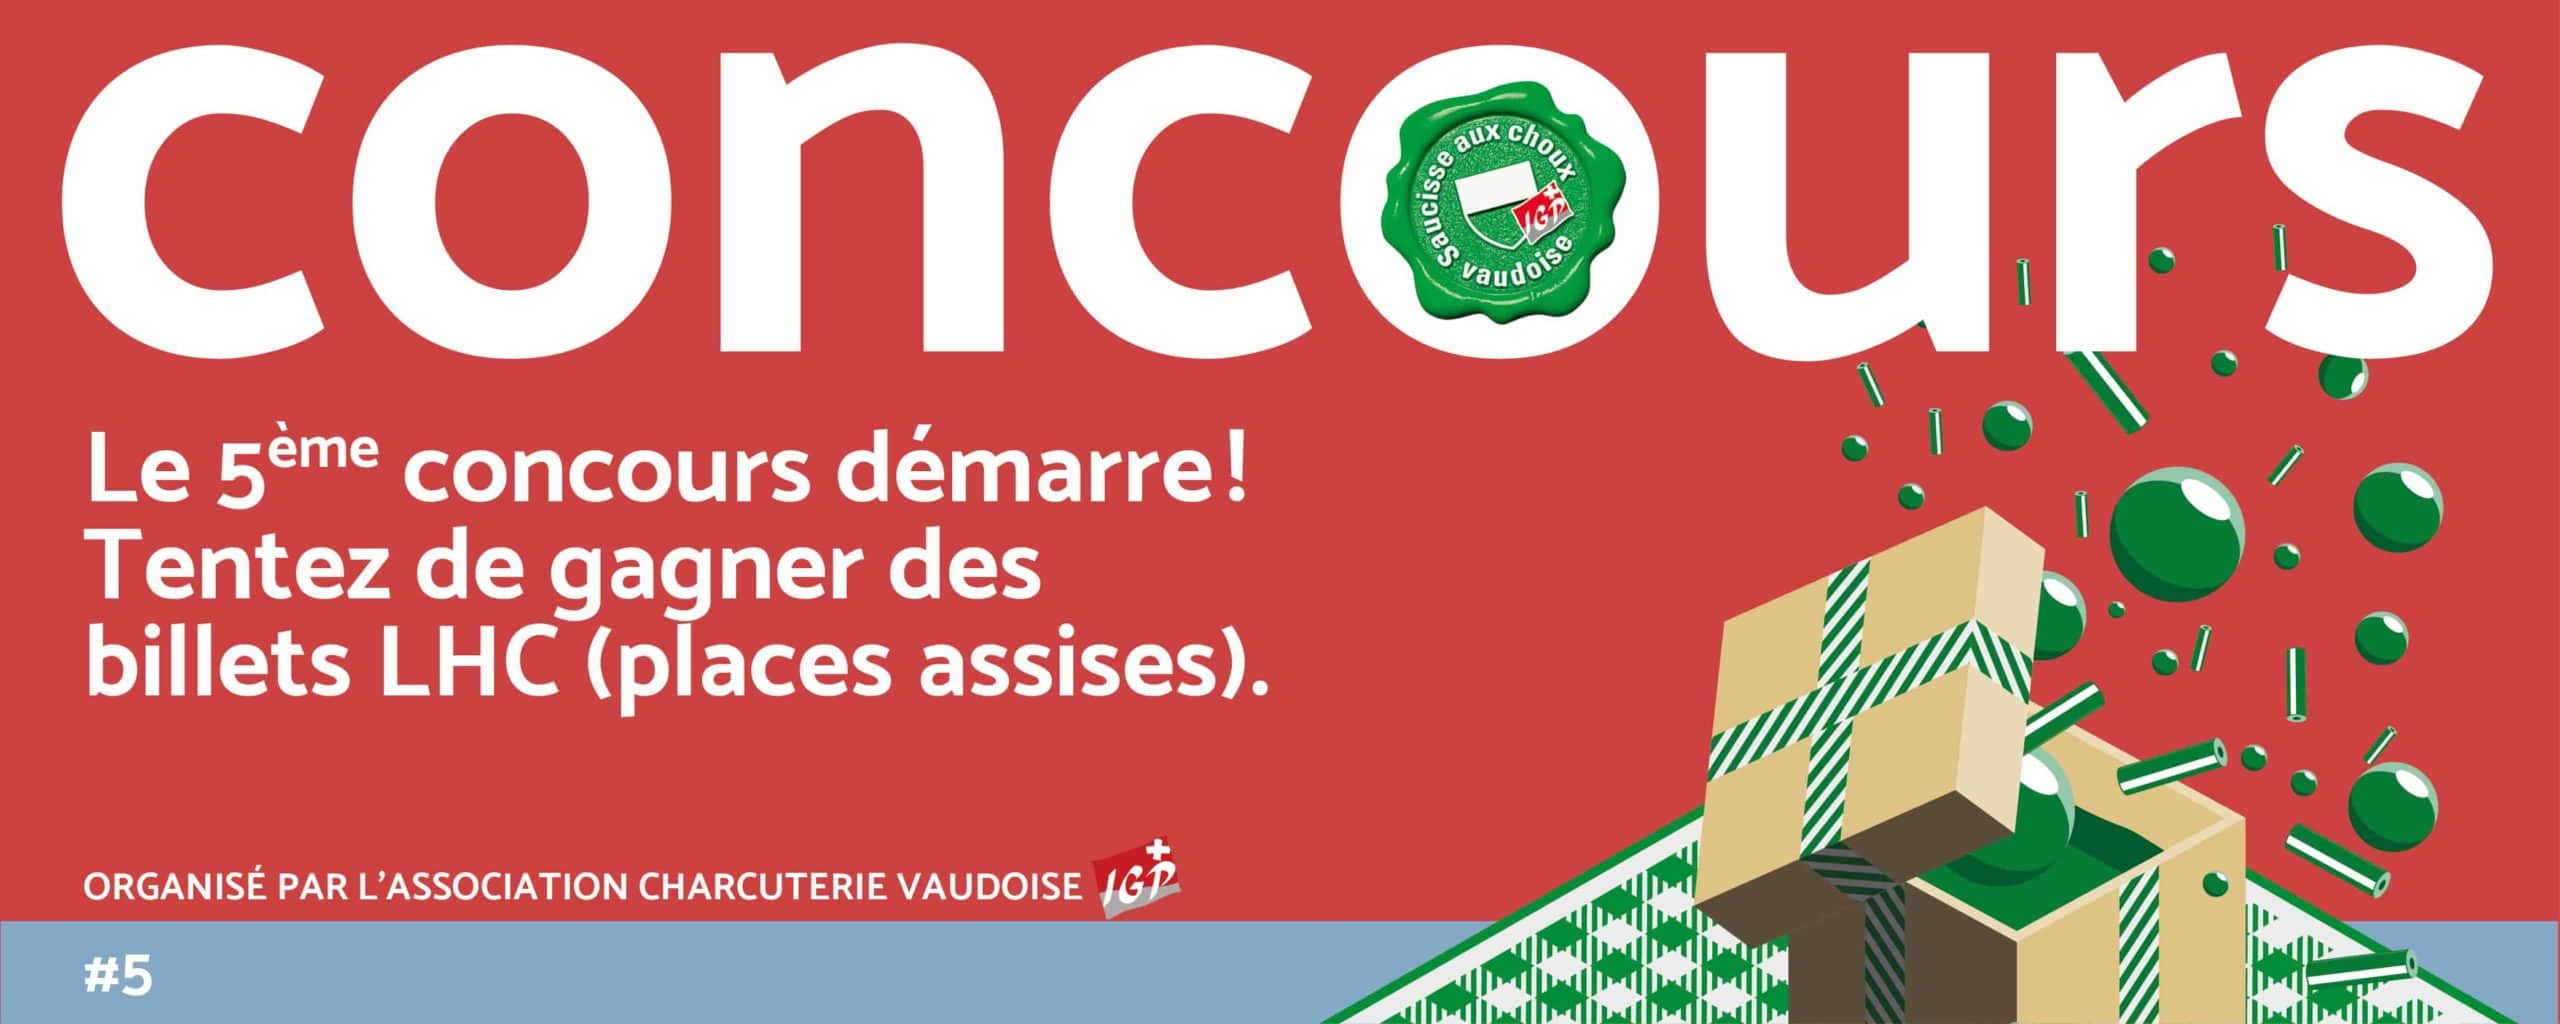 gagnant concours